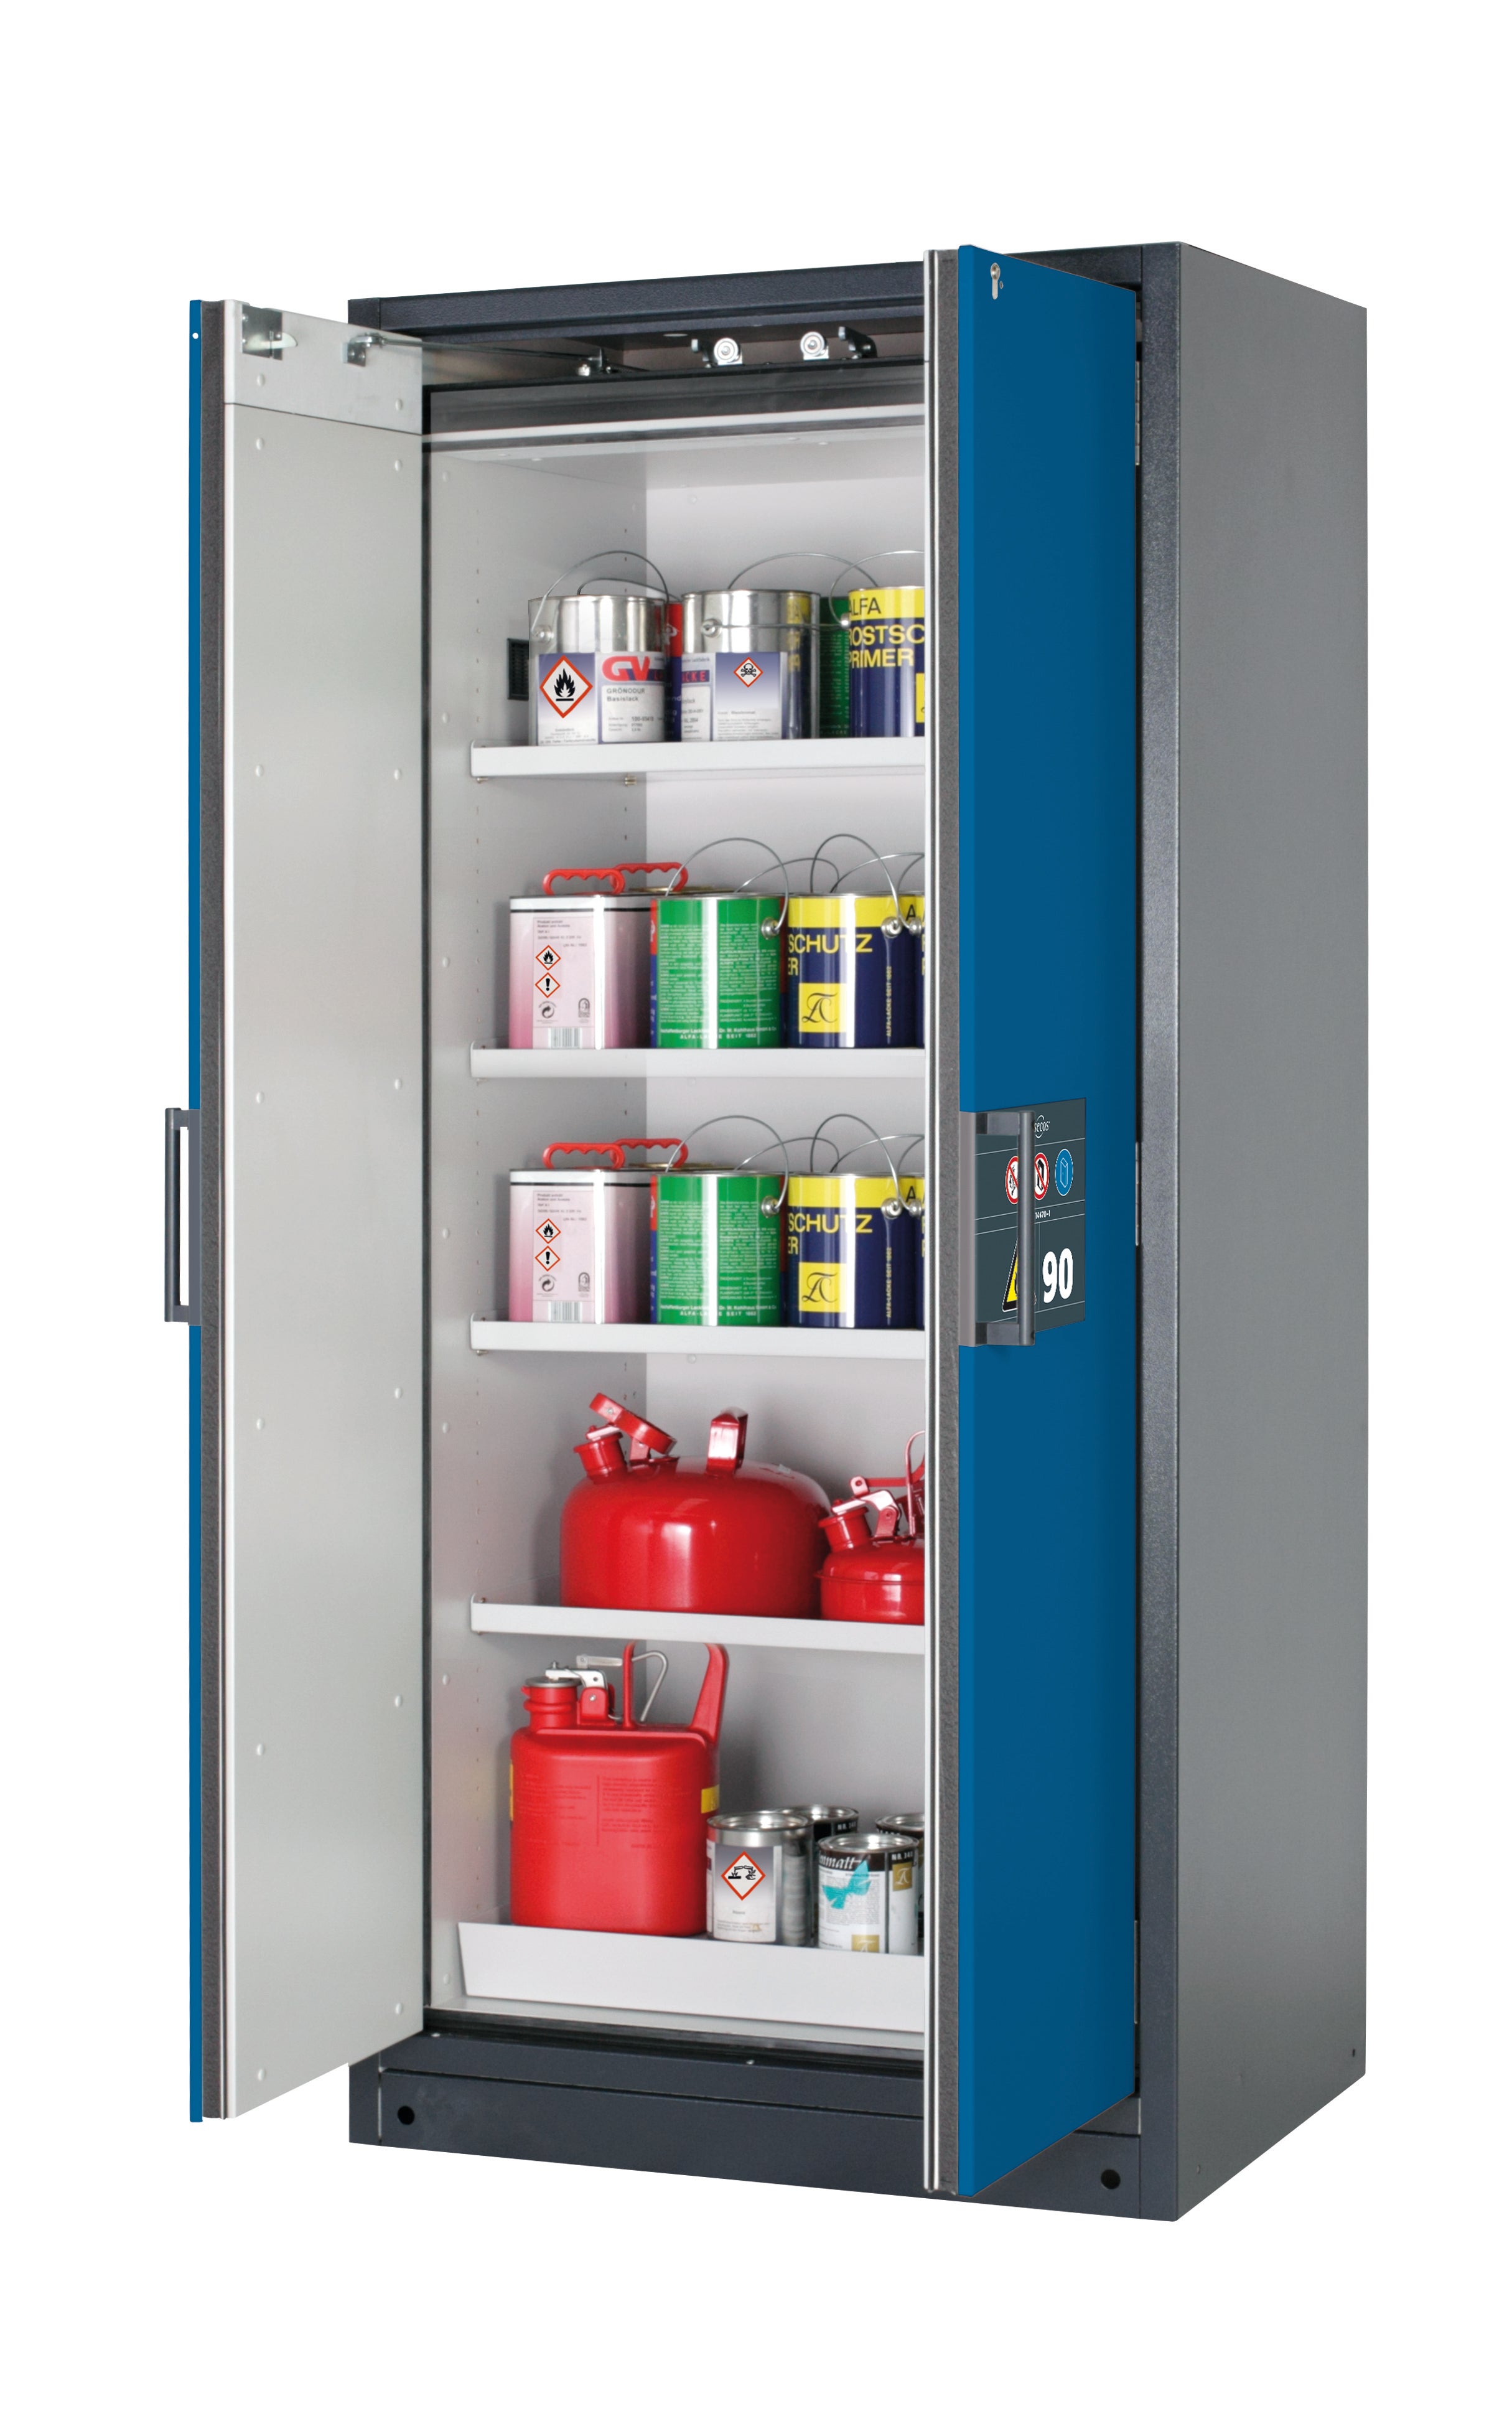 Type 90 safety storage cabinet Q-CLASSIC-90 model Q90.195.090 in gentian blue RAL 5010 with 4x shelf standard (sheet steel),